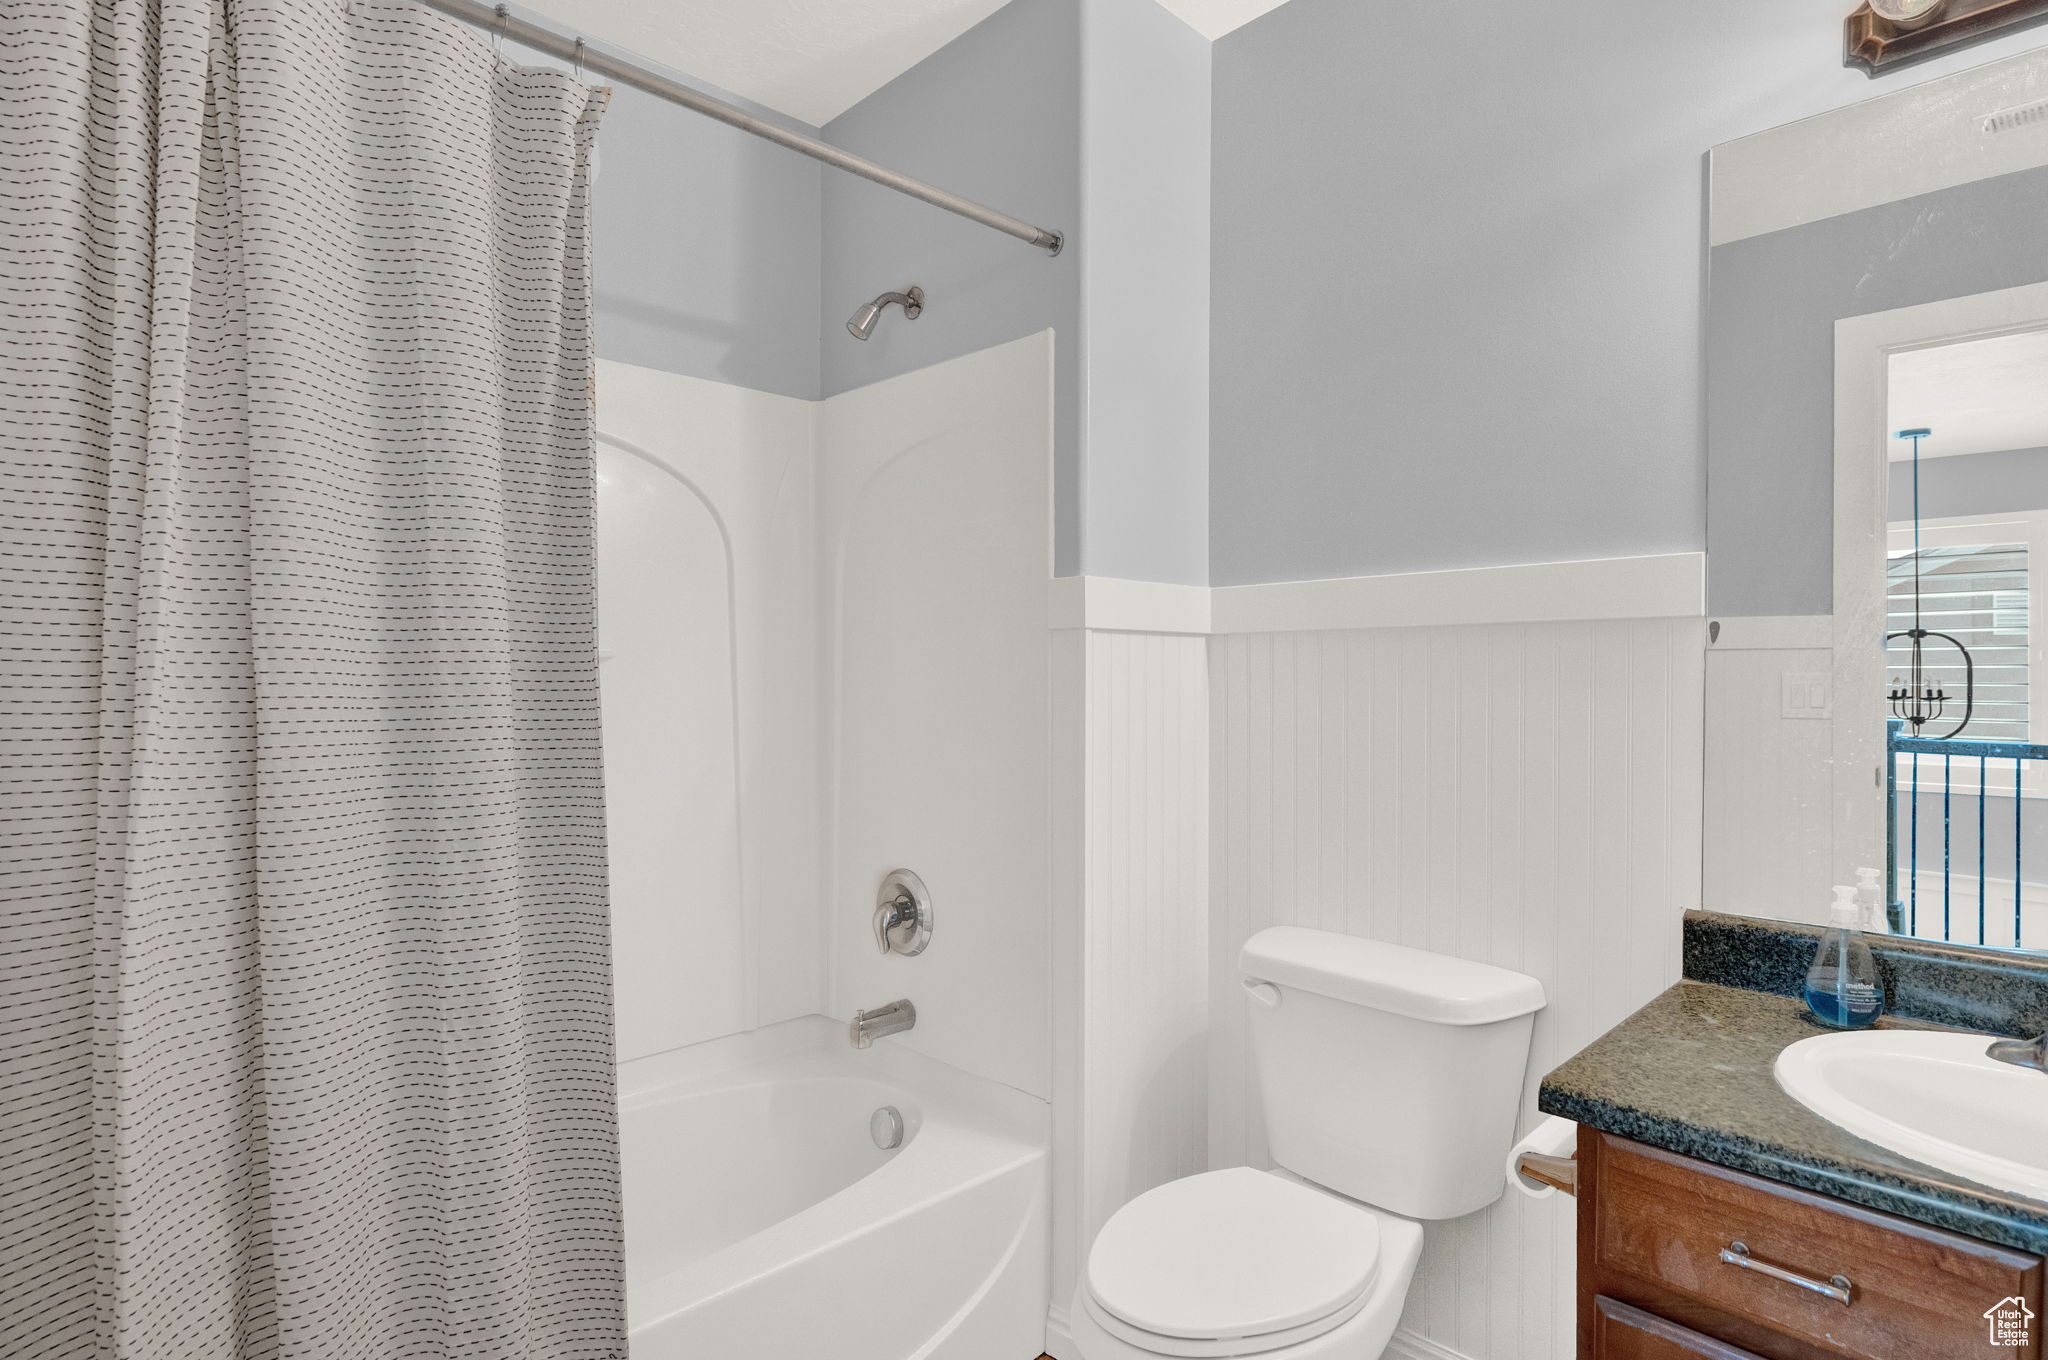 Full bathroom featuring oversized vanity, shower / tub combo, and toilet